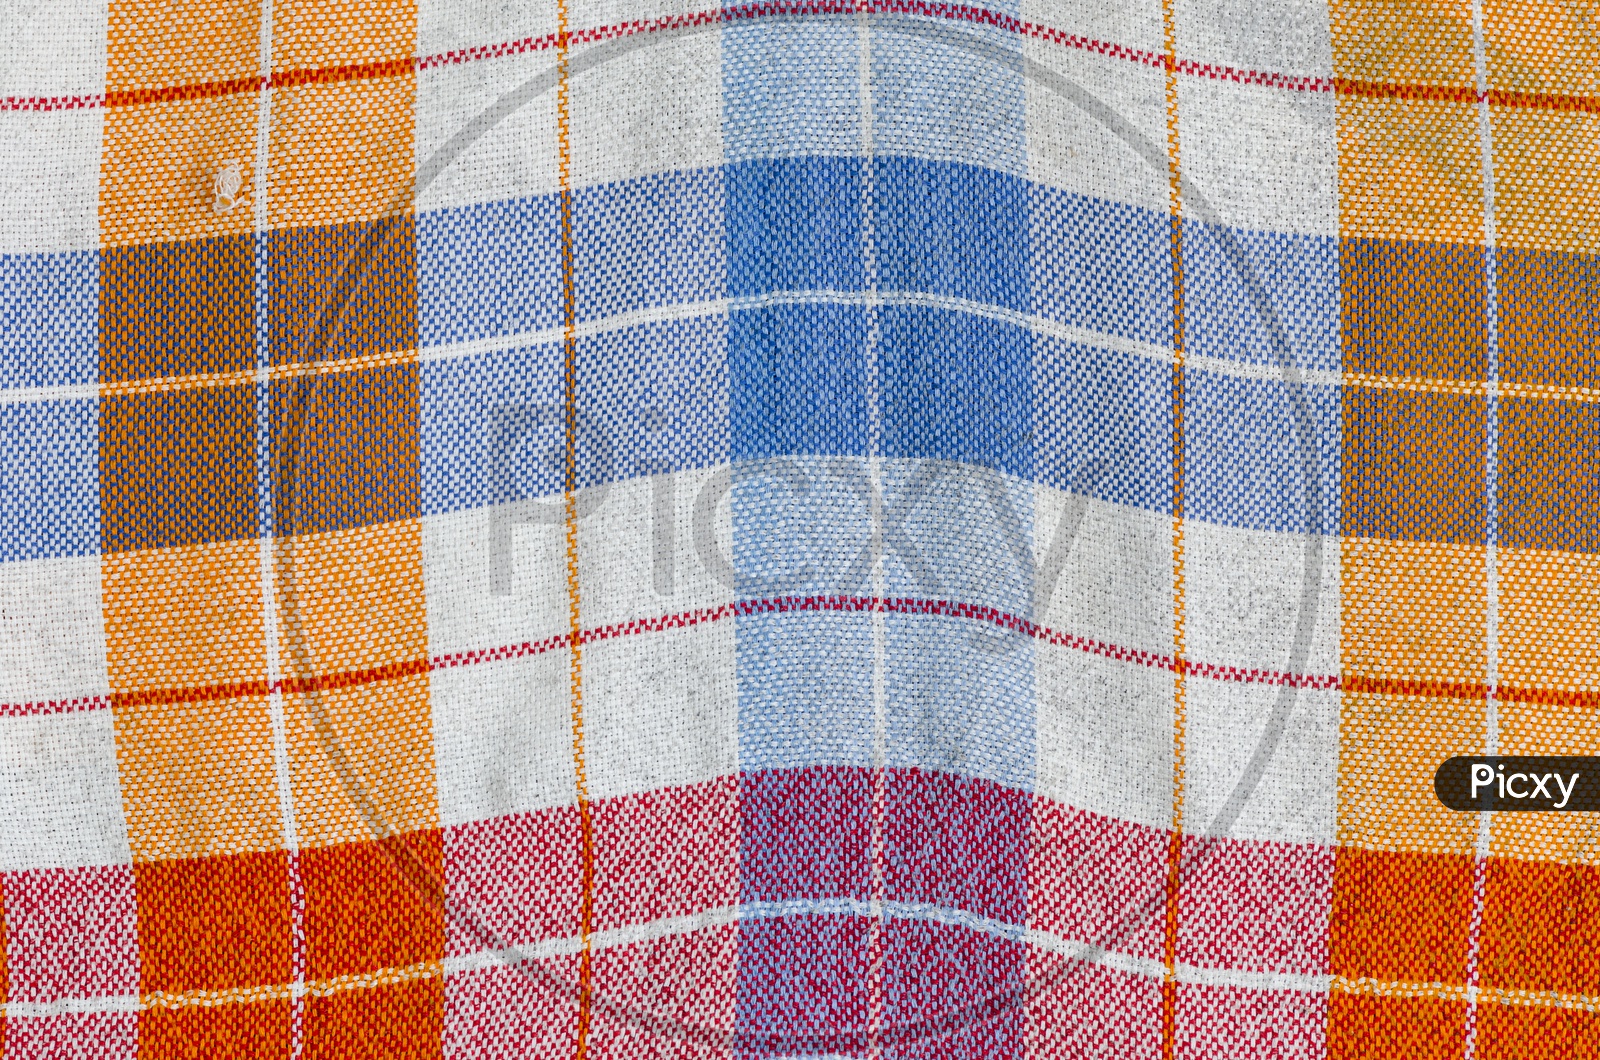 Fabric Or Cloth Texture Background With Patterns Or Stripes